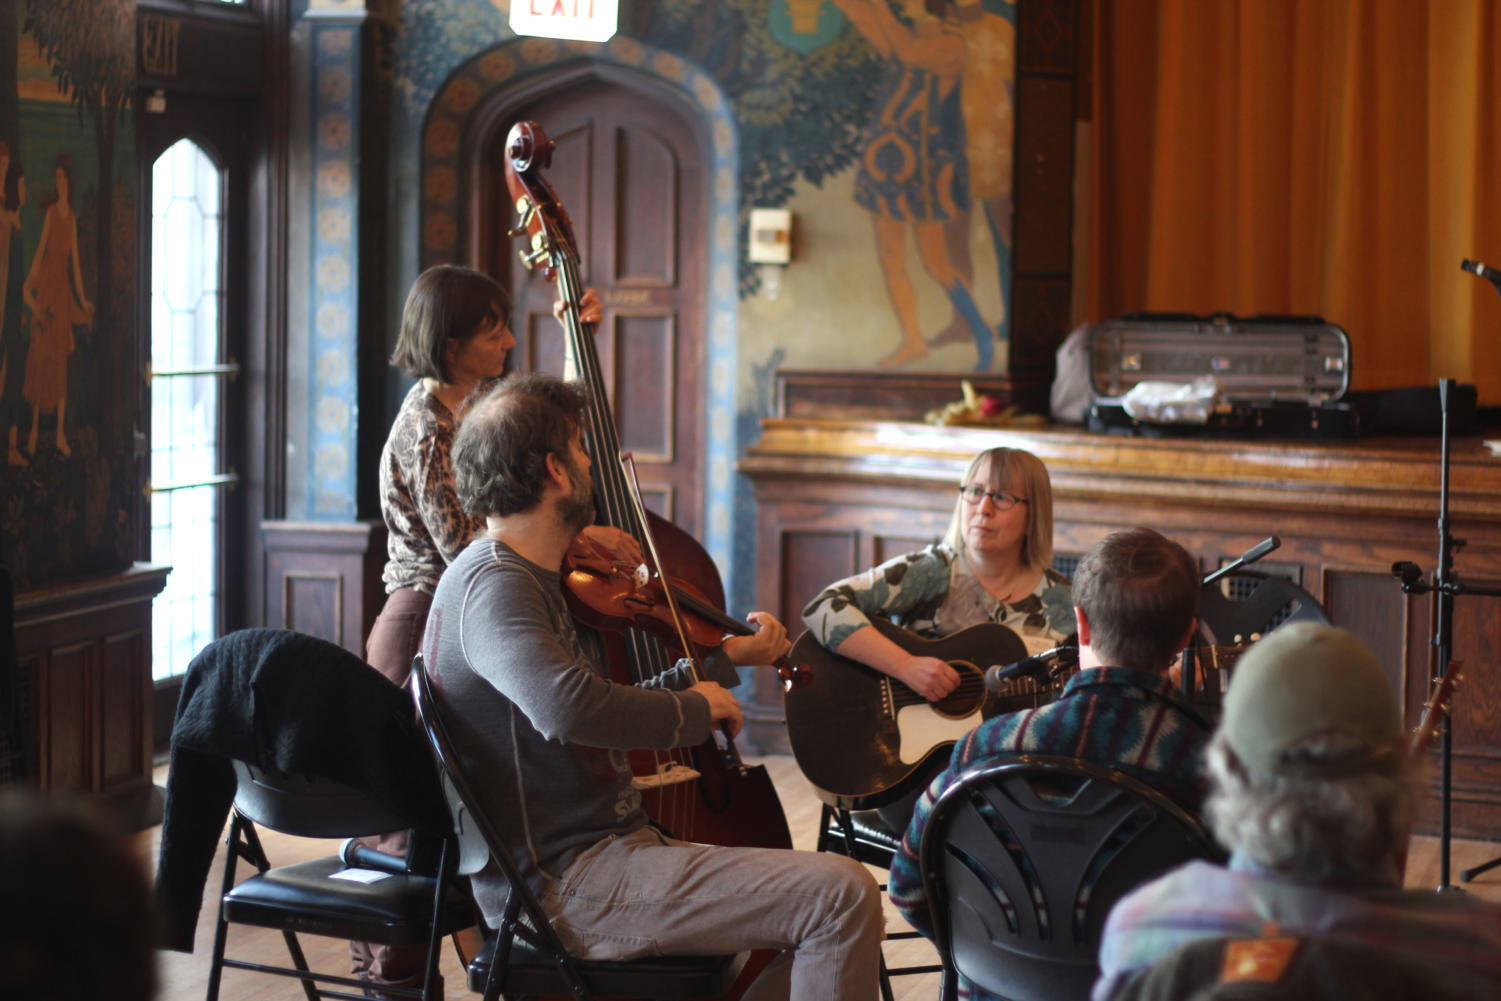 Members of Bigfoot (Rhys Jones on fiddle, Meredith McIntosh on bass, Susie Goehring on guitar) at a workshop in Ida Noyes about playing backup rhythm for old-time music.